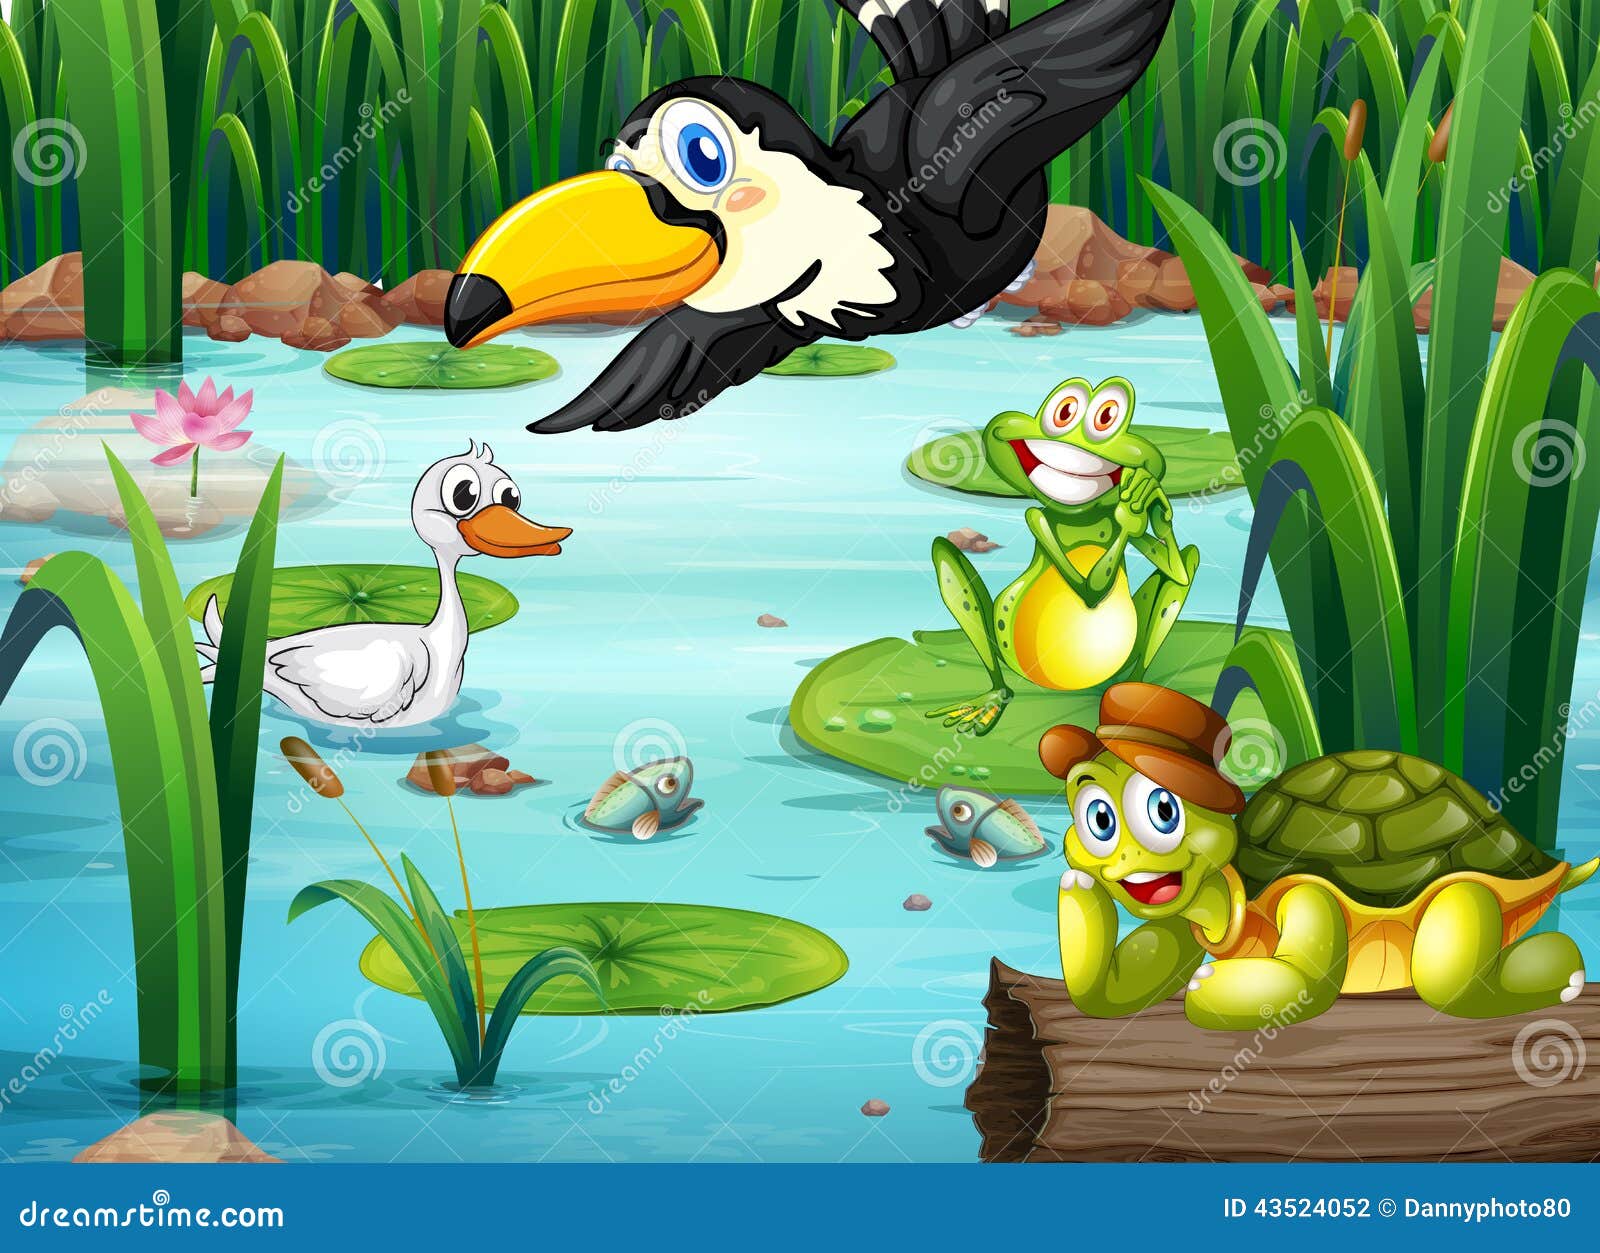 A pond with animals stock vector. Illustration of pond - 43524052